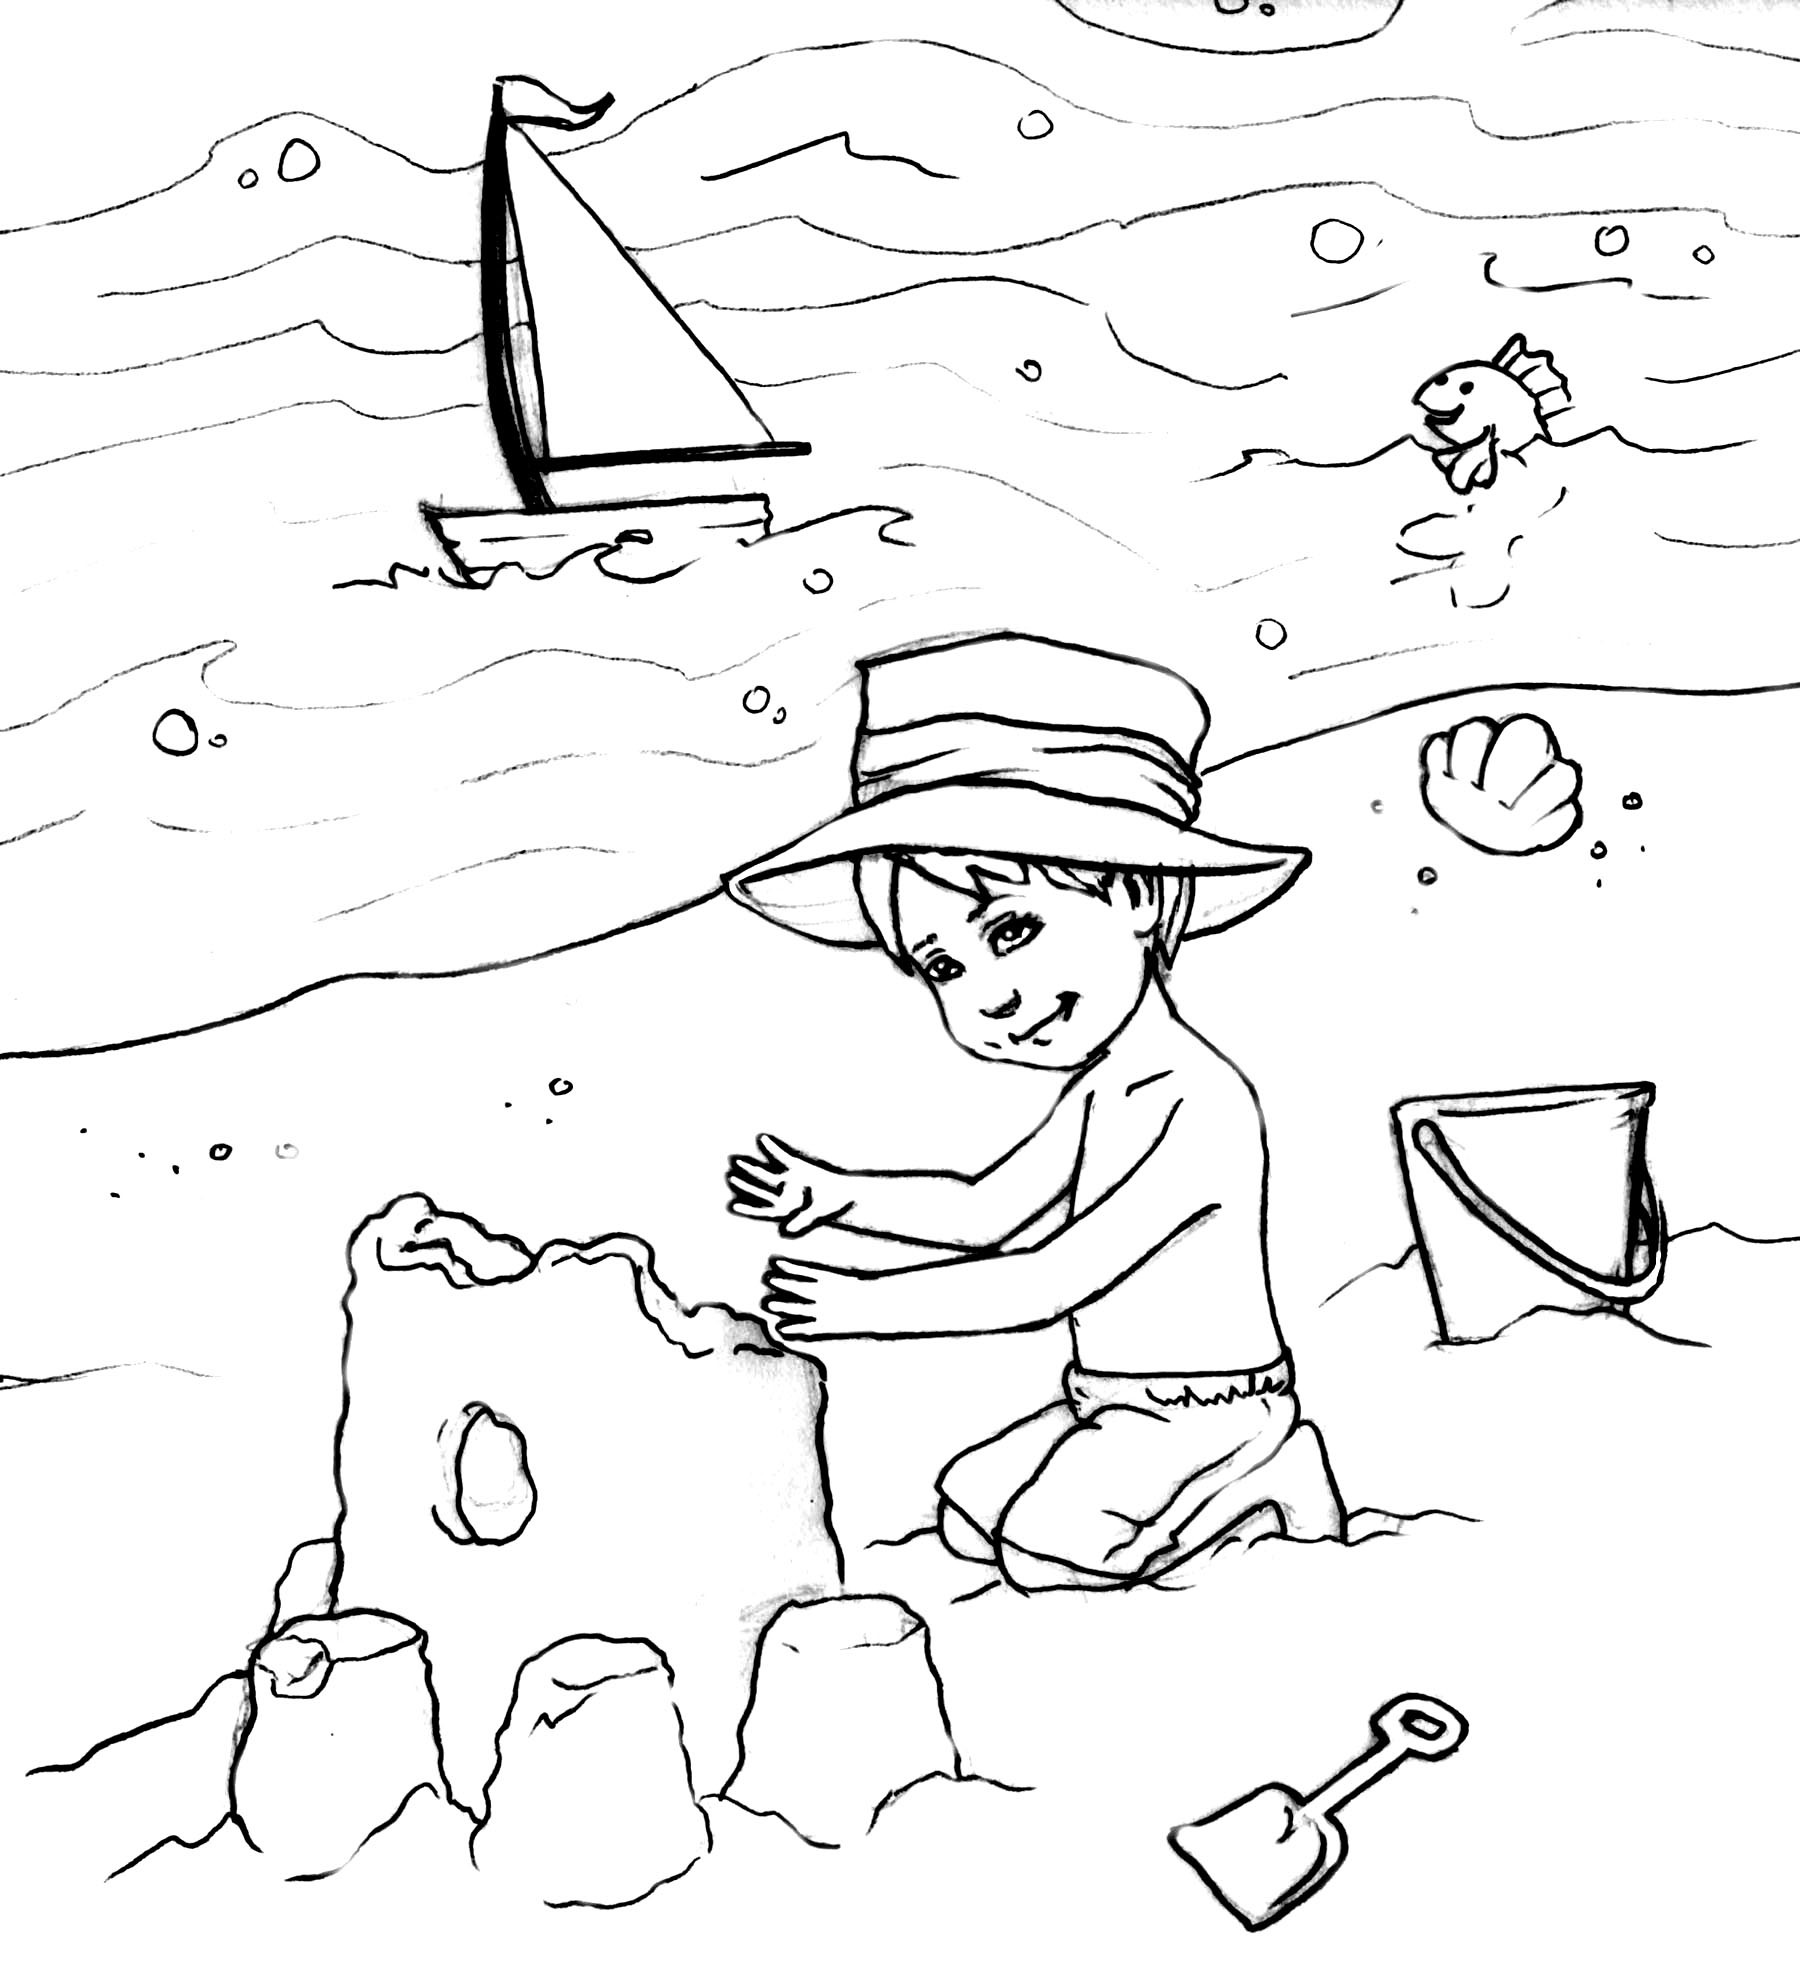 Beach Printable Coloring Pages
 Rocky Beach Coloring Page Coloring Coloring Pages